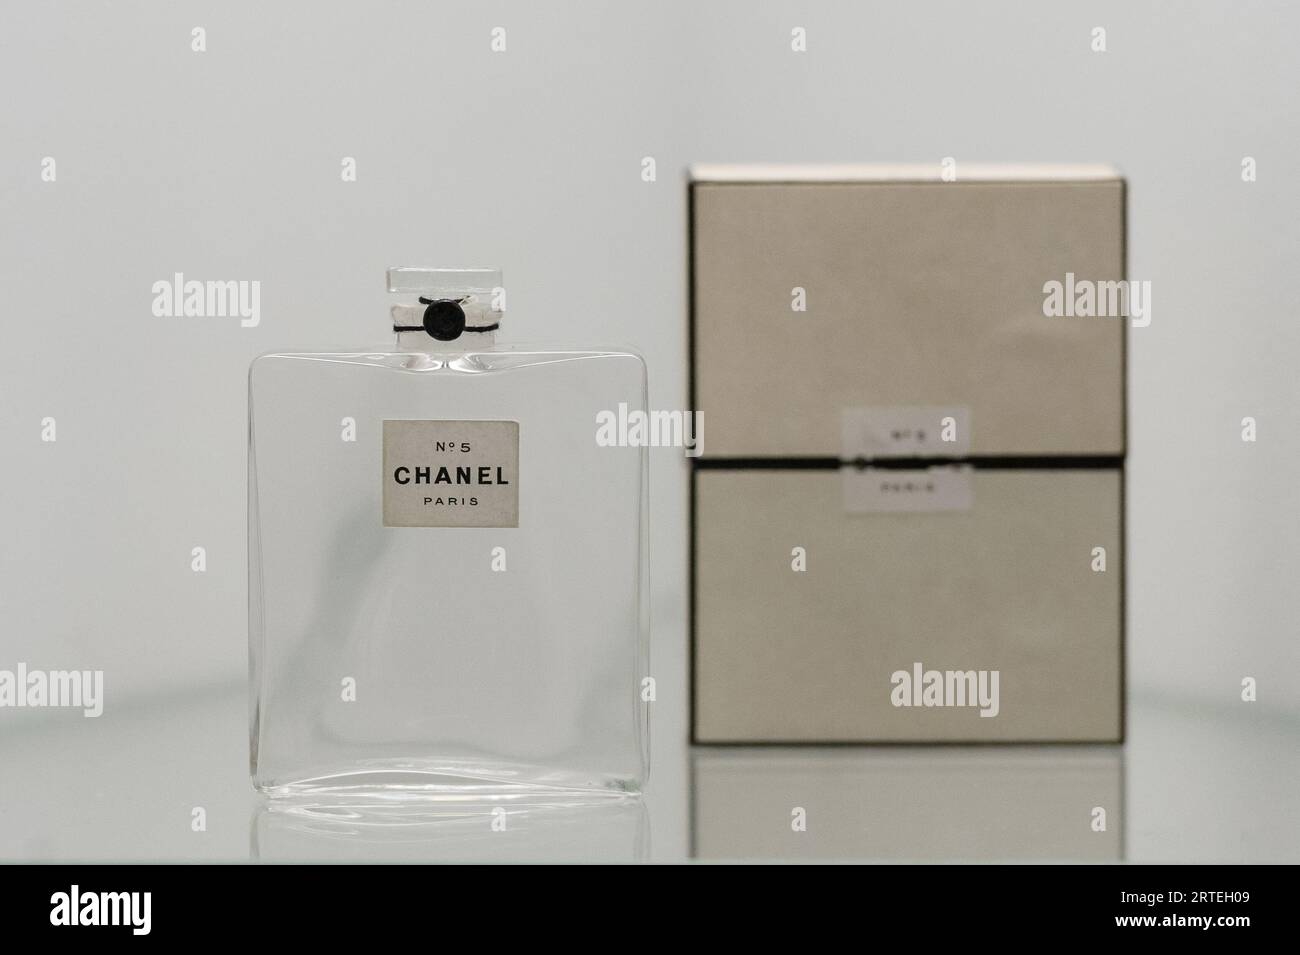 LONDON, UNITED KINGDOM - SEPTEMBER 12, 2023: The iconic CHANEL No.5 perfume bottle (1921) is on display during a photocall for the upcoming exhibition Gabrielle Chanel. Fashion Manifesto (16 September 2023 - 25 February 2024) at the V&A in London, United Kingdom on September 12, 2023. The UK's first major exhibition dedicated to the work of the pioneering French couturiere, Gabrielle ‘Coco' Chanel, will showcase over 200 looks seen together for the first time, as well as accessories, perfumes, and jewellery. (Photo by WIktor Szymanowicz/NurPhoto) Stock Photo